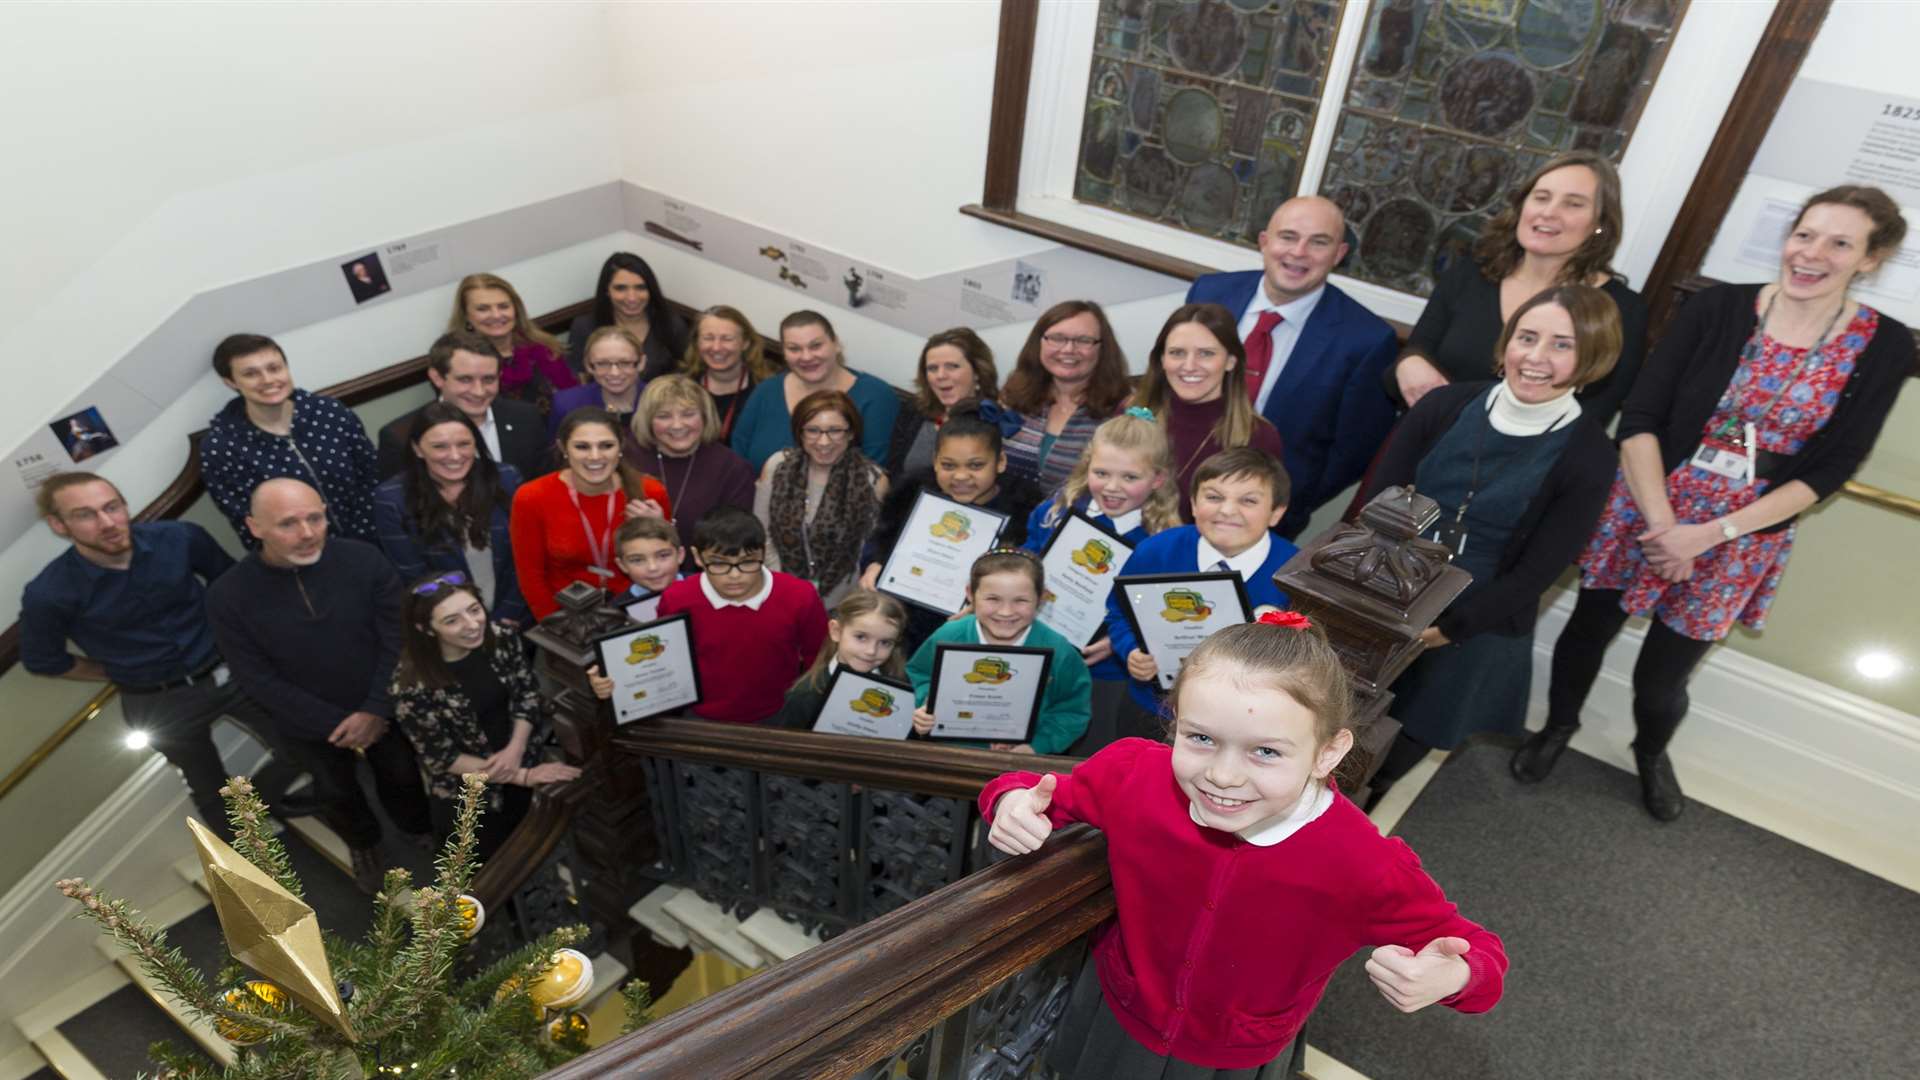 Overall Champion, Ayanna Smith from Borden Primary School, with finalists, winners, and supporters at the Perfect Packed Lunch Awards staged at The Beaney House of Art and Knowledge, Canterbury.